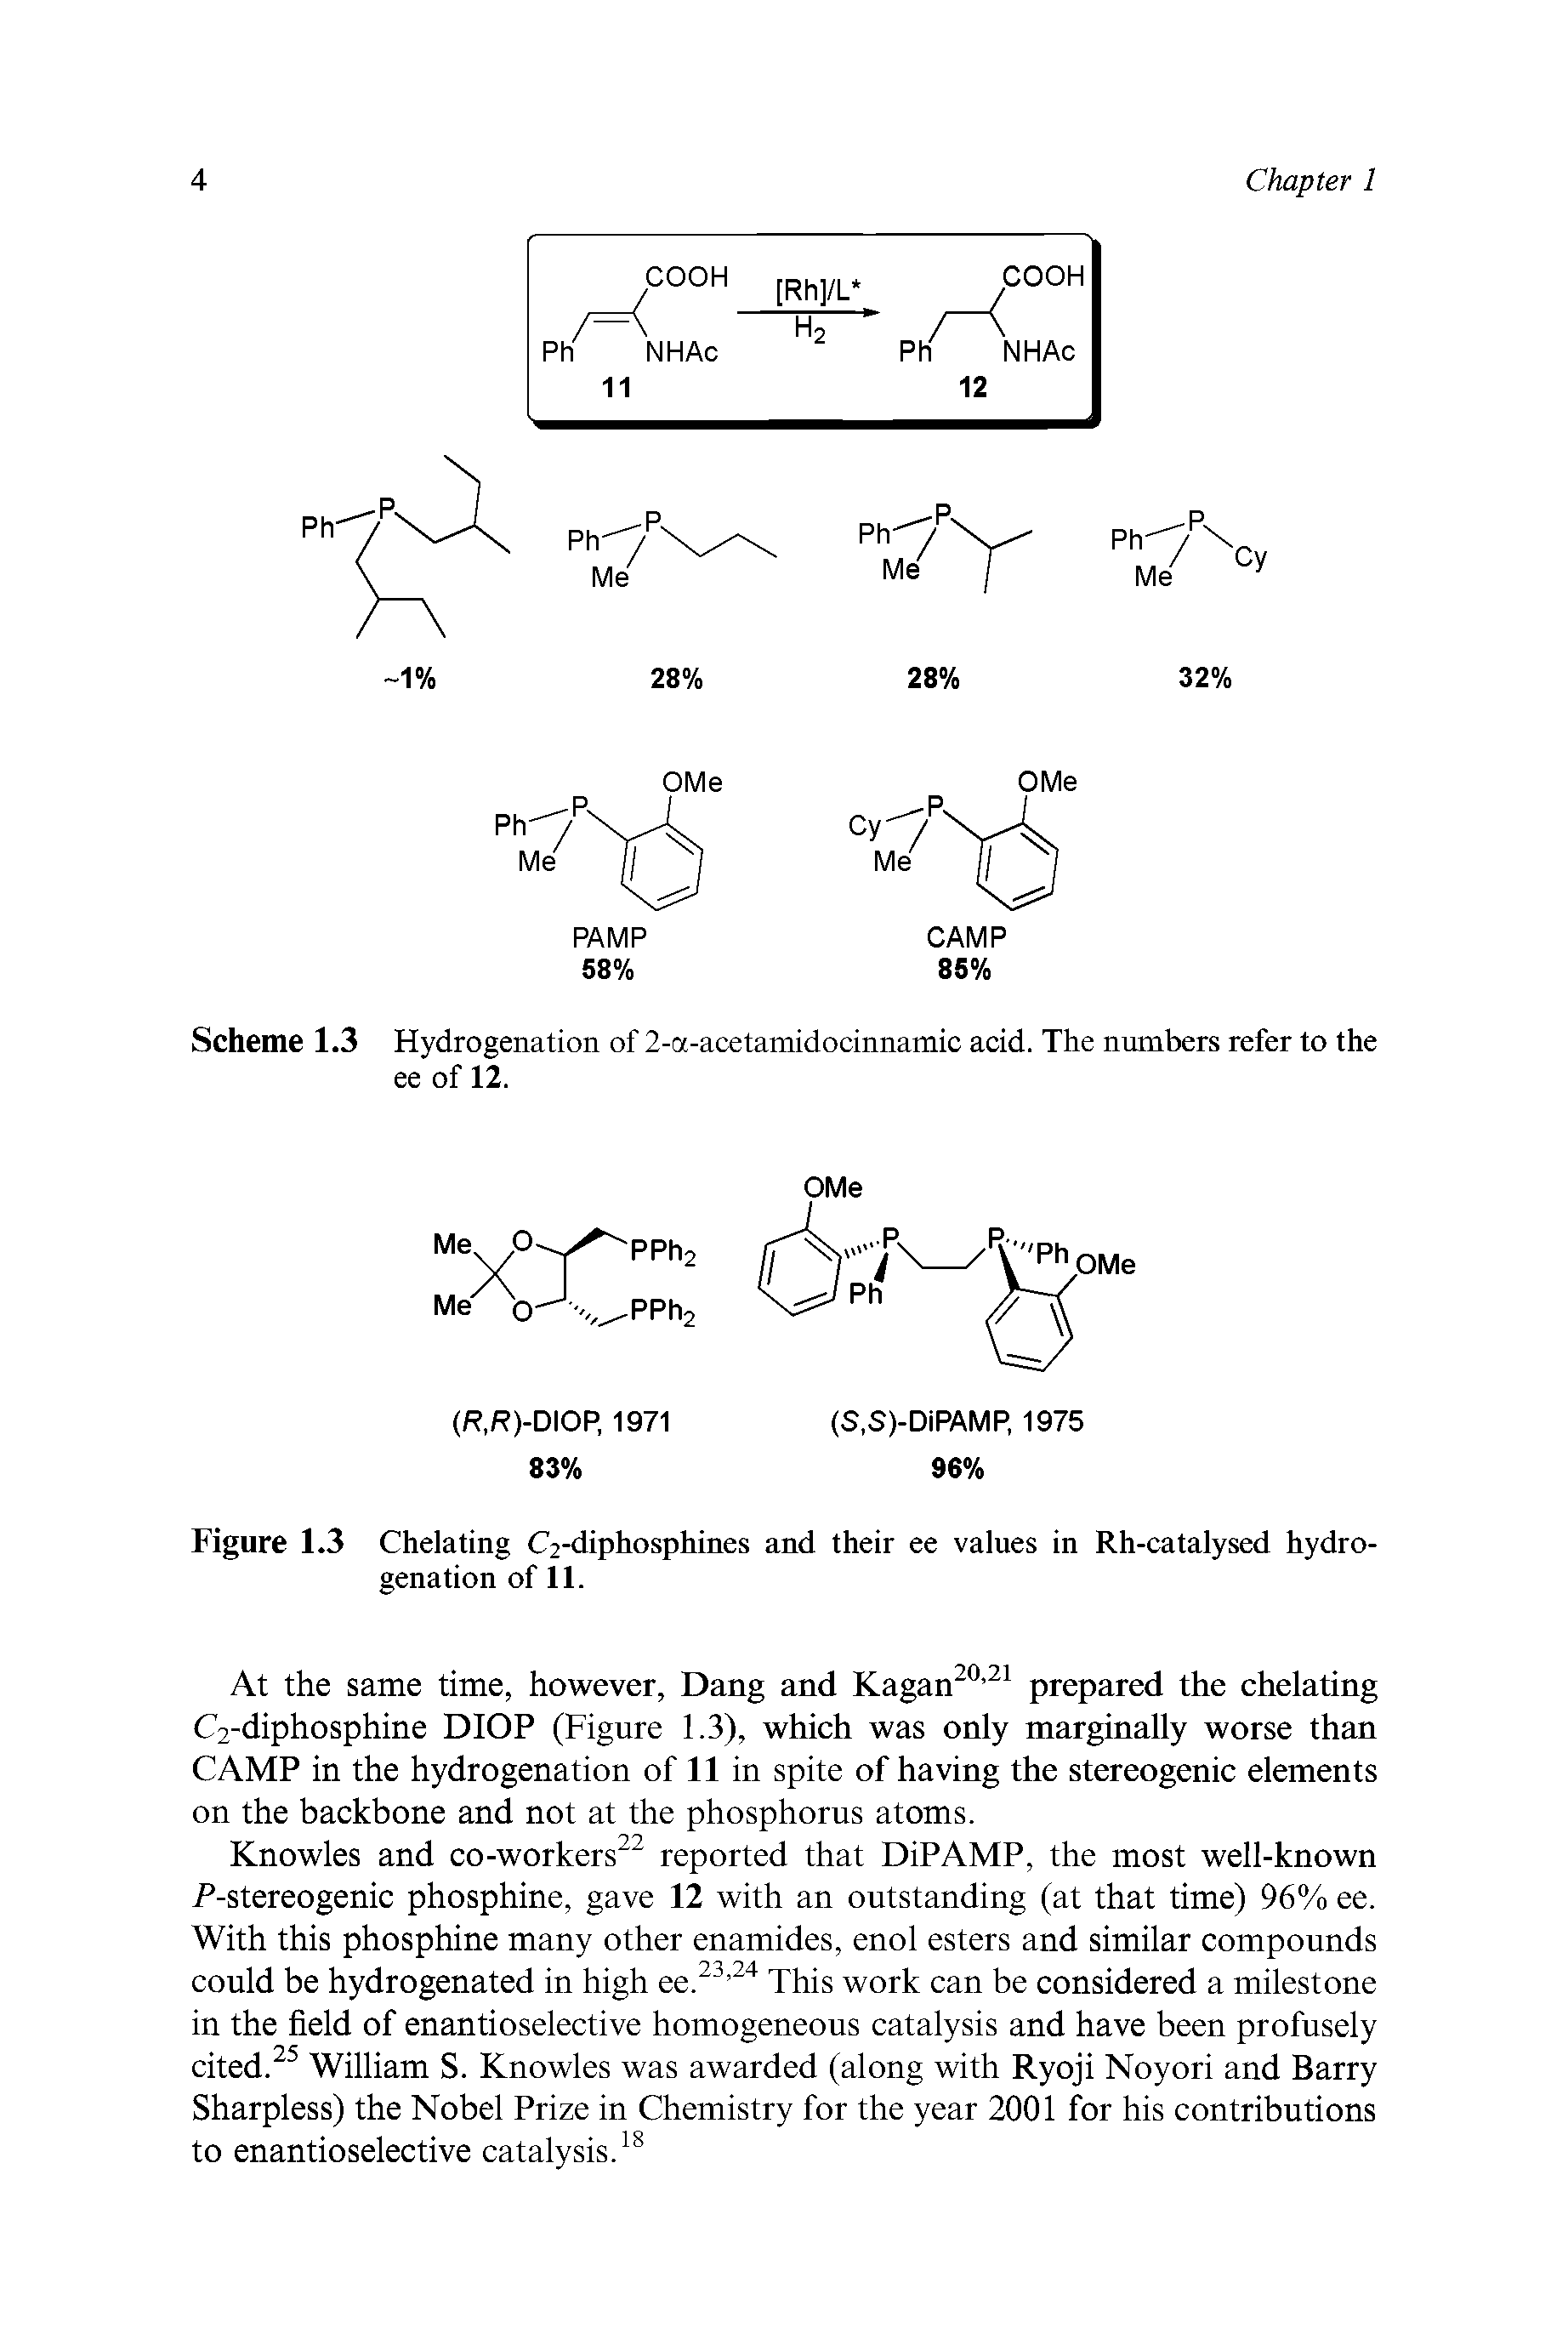 Figure 1.3 Chelating C2-diphosphines and their ee values in Rh-catalysed hydrogenation of 11.